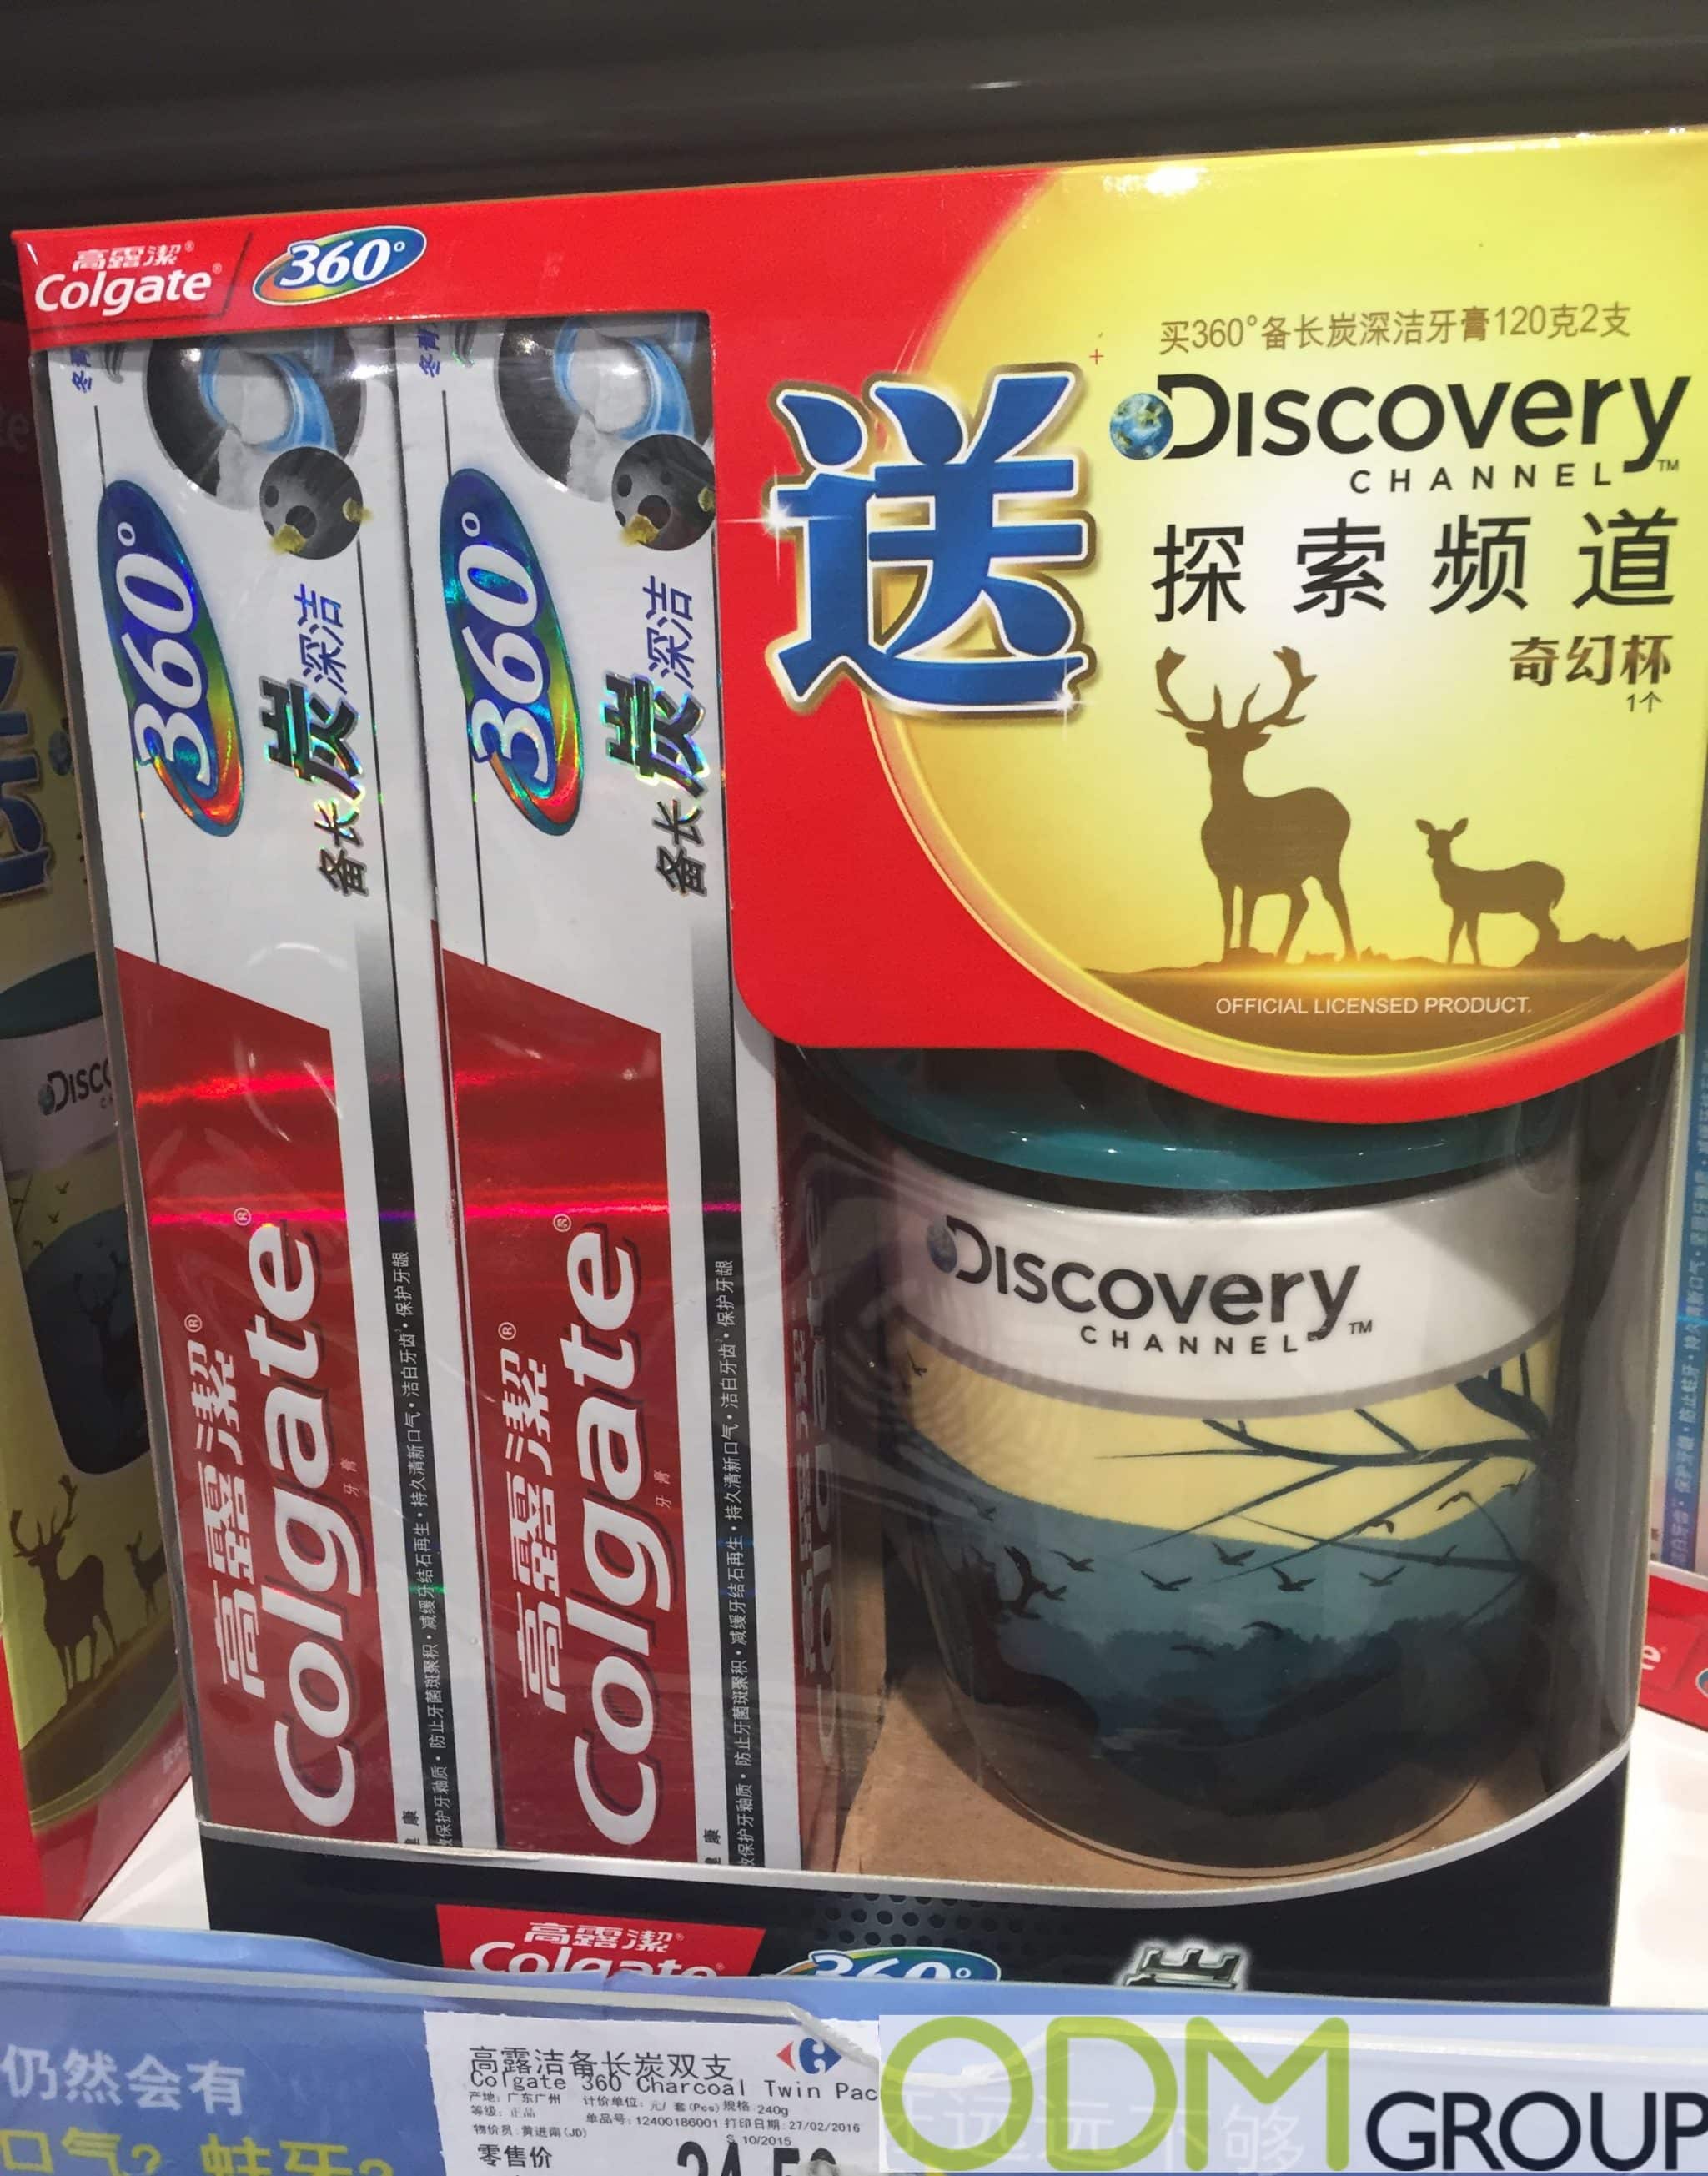 Free Gift Mug - Promotion by Colgate and Discovery Channel